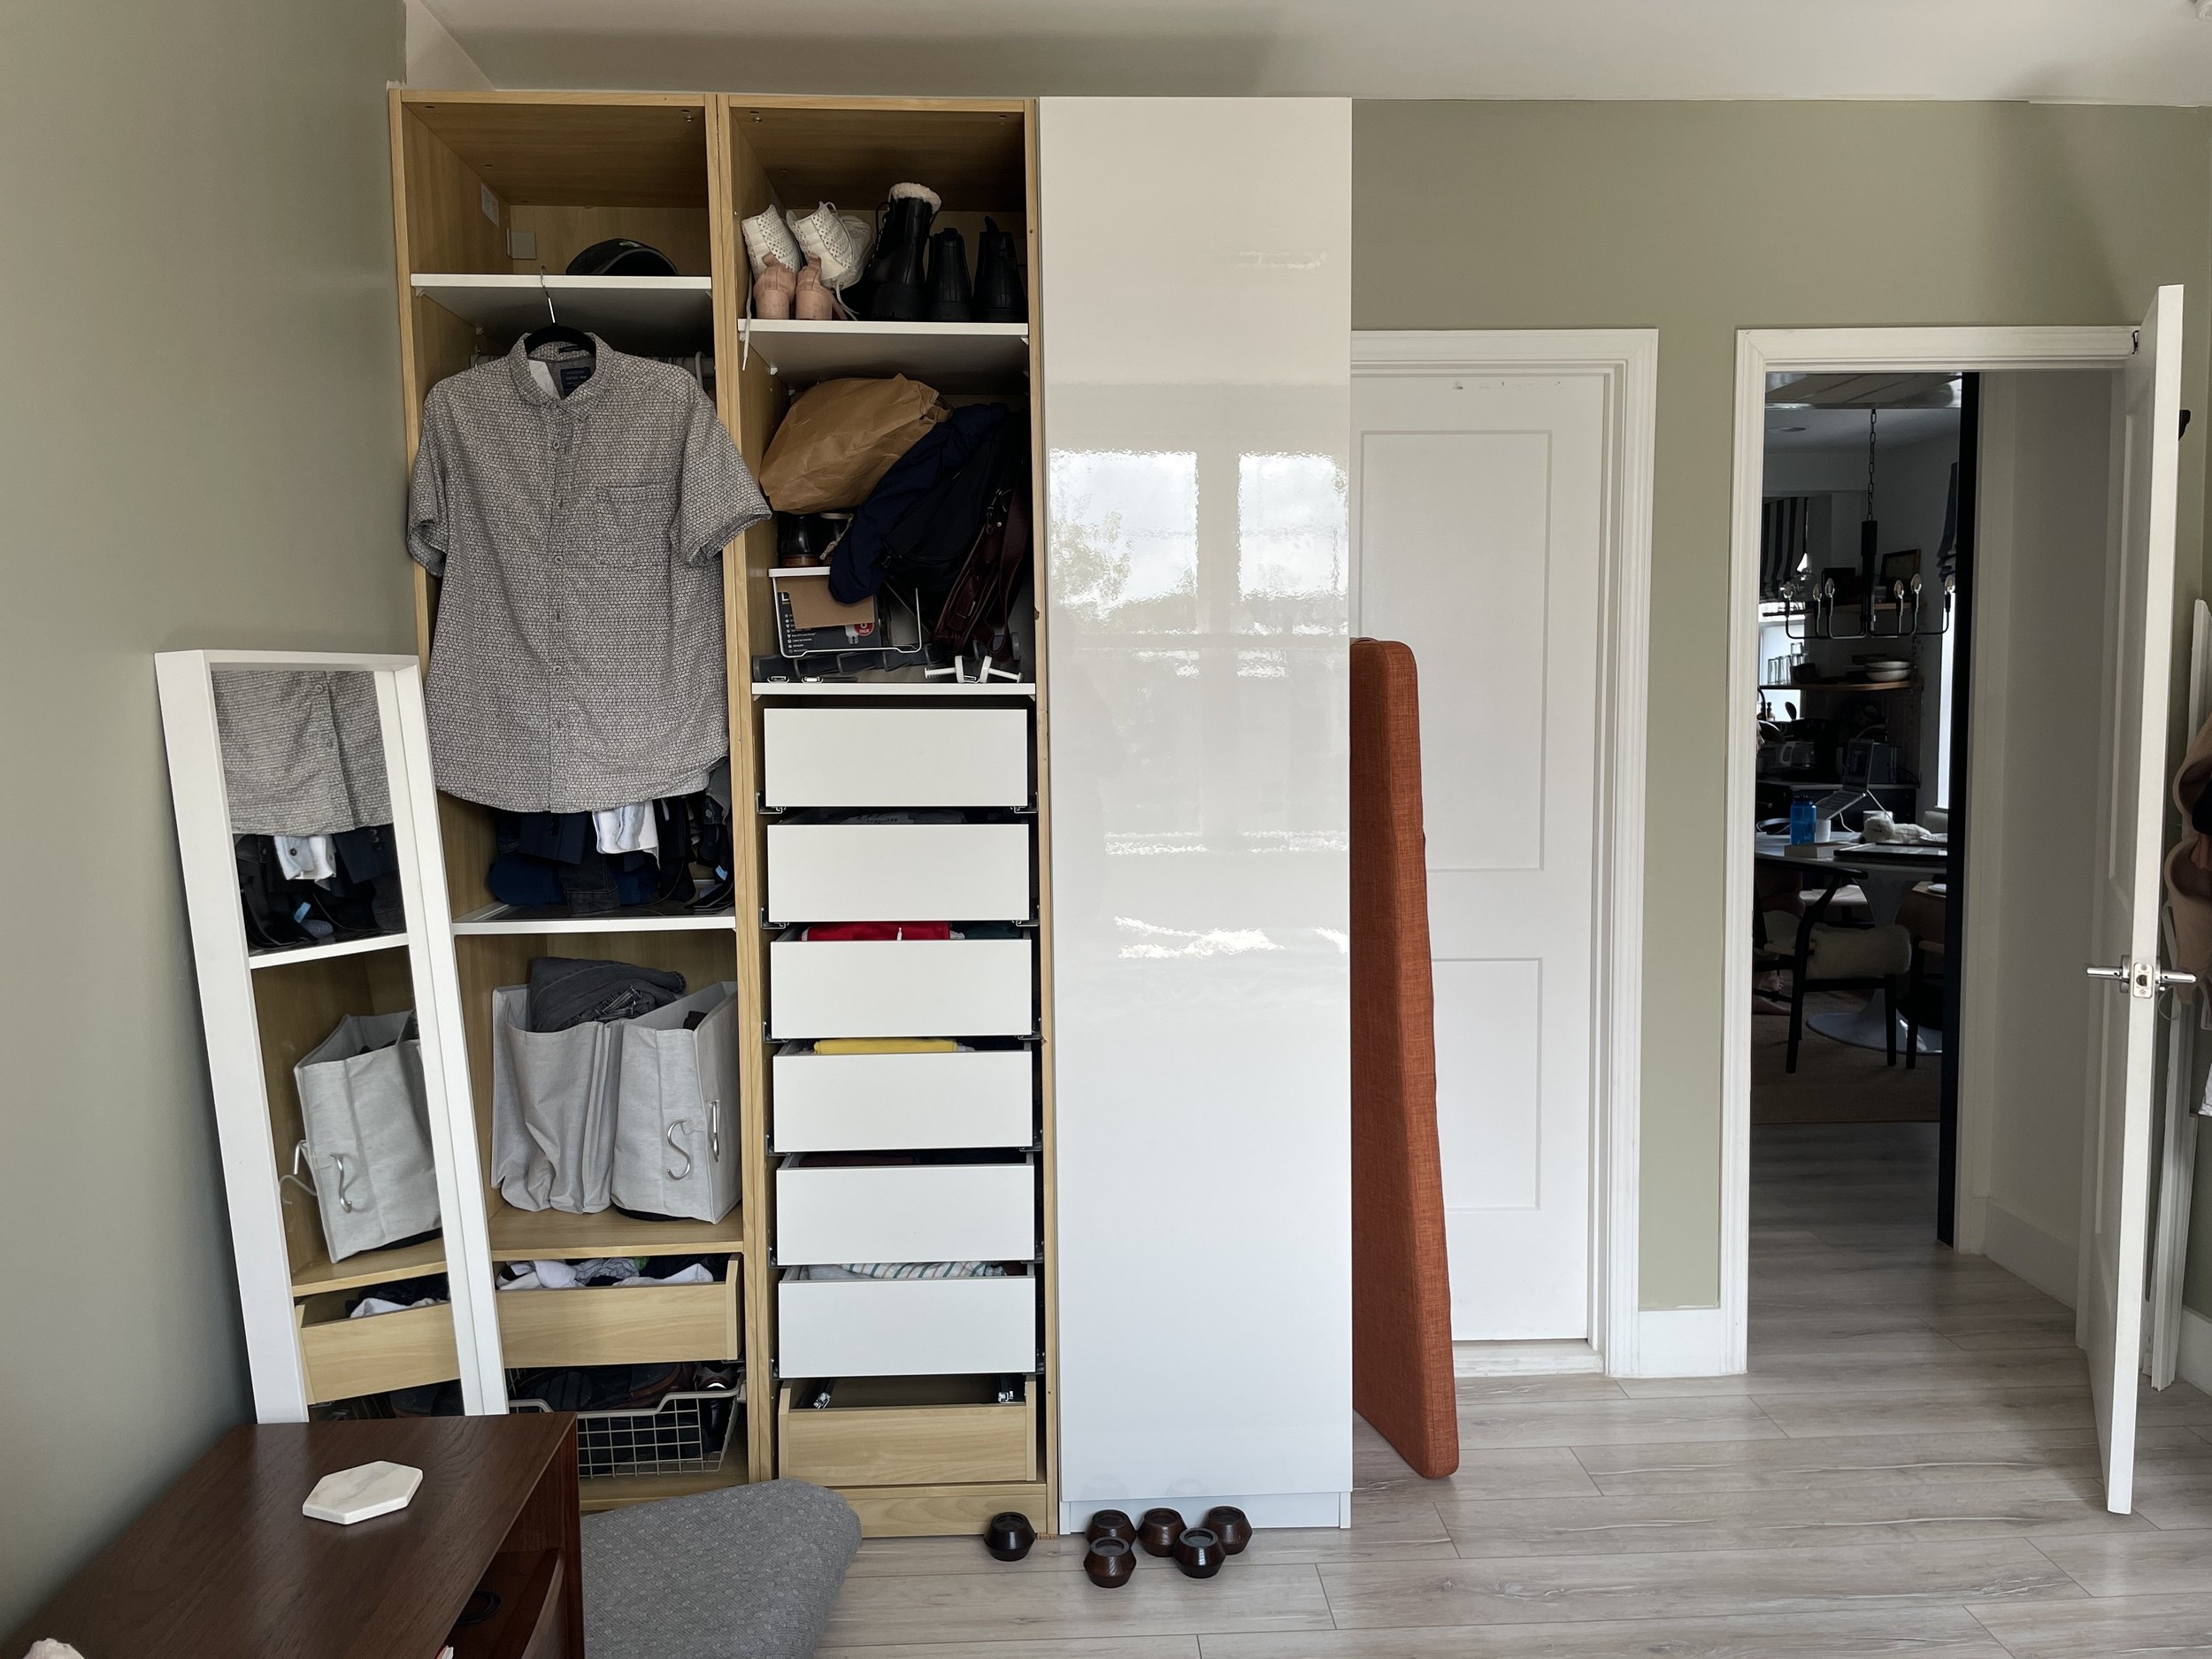 A partially complete closet project in Dominique's bedroom.